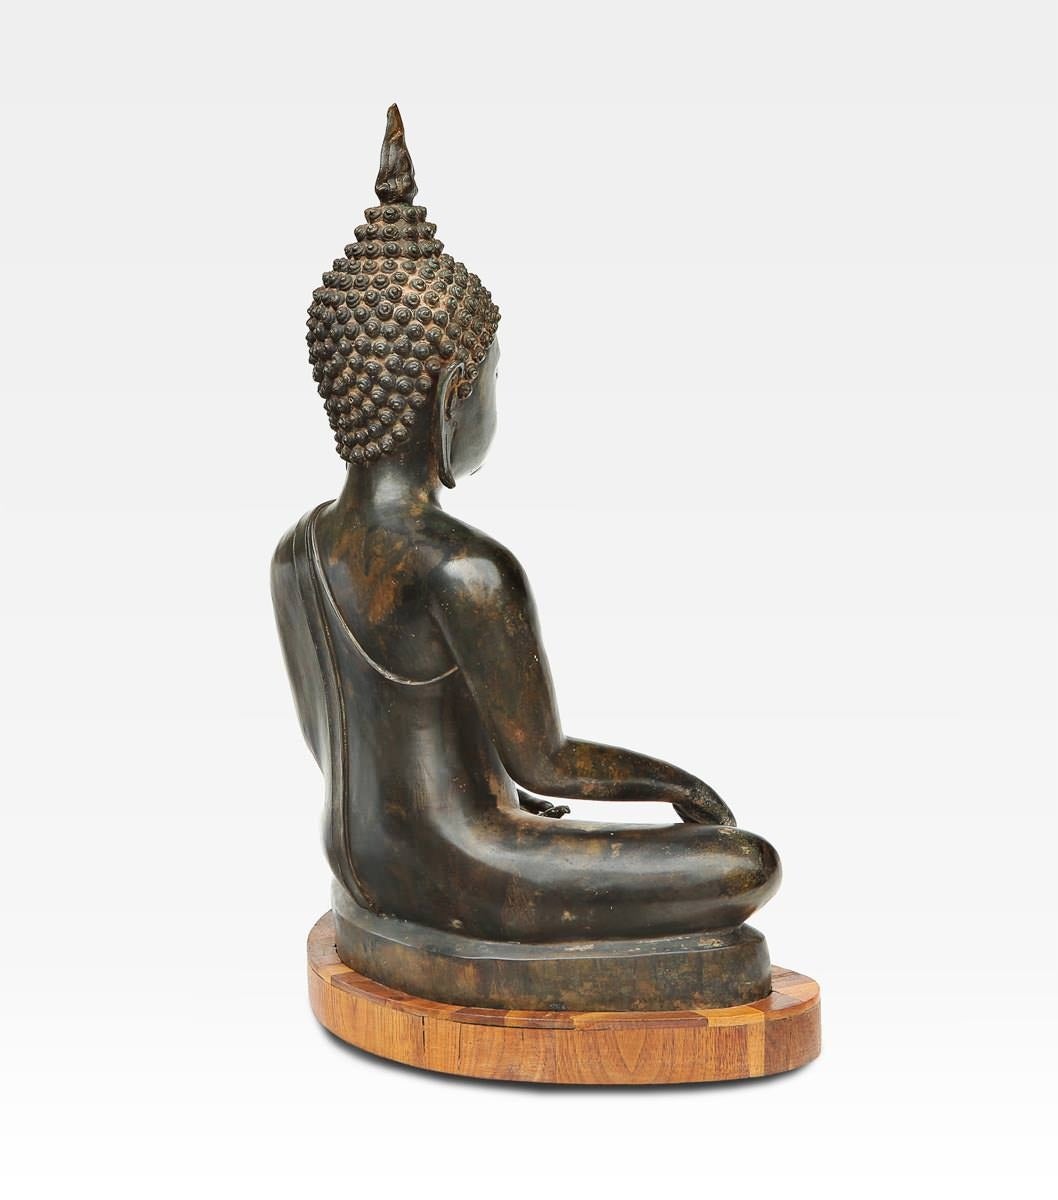 This beautiful sculpture representing a Thai Buddha in position Bhumisparsamudra. In this position the right hand  resting on the knee with the palm down and the fingers that touch the ground. The Buddha takes this position when it reaches the